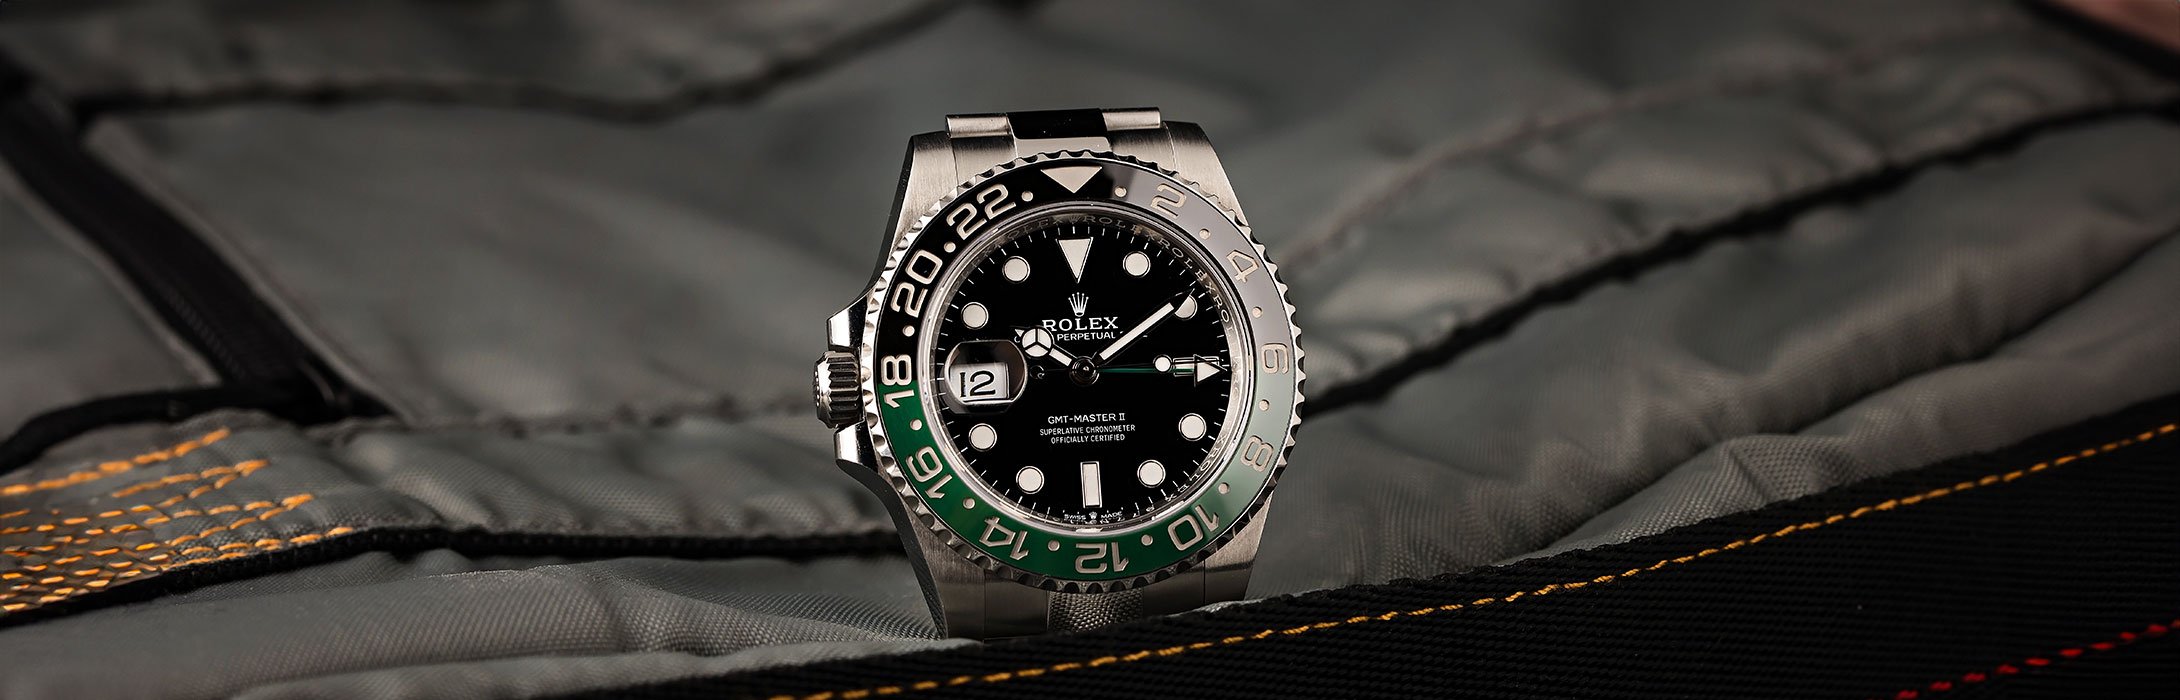 Rolex Sprite Review: A Closer Look at the GMT-Master II Icon